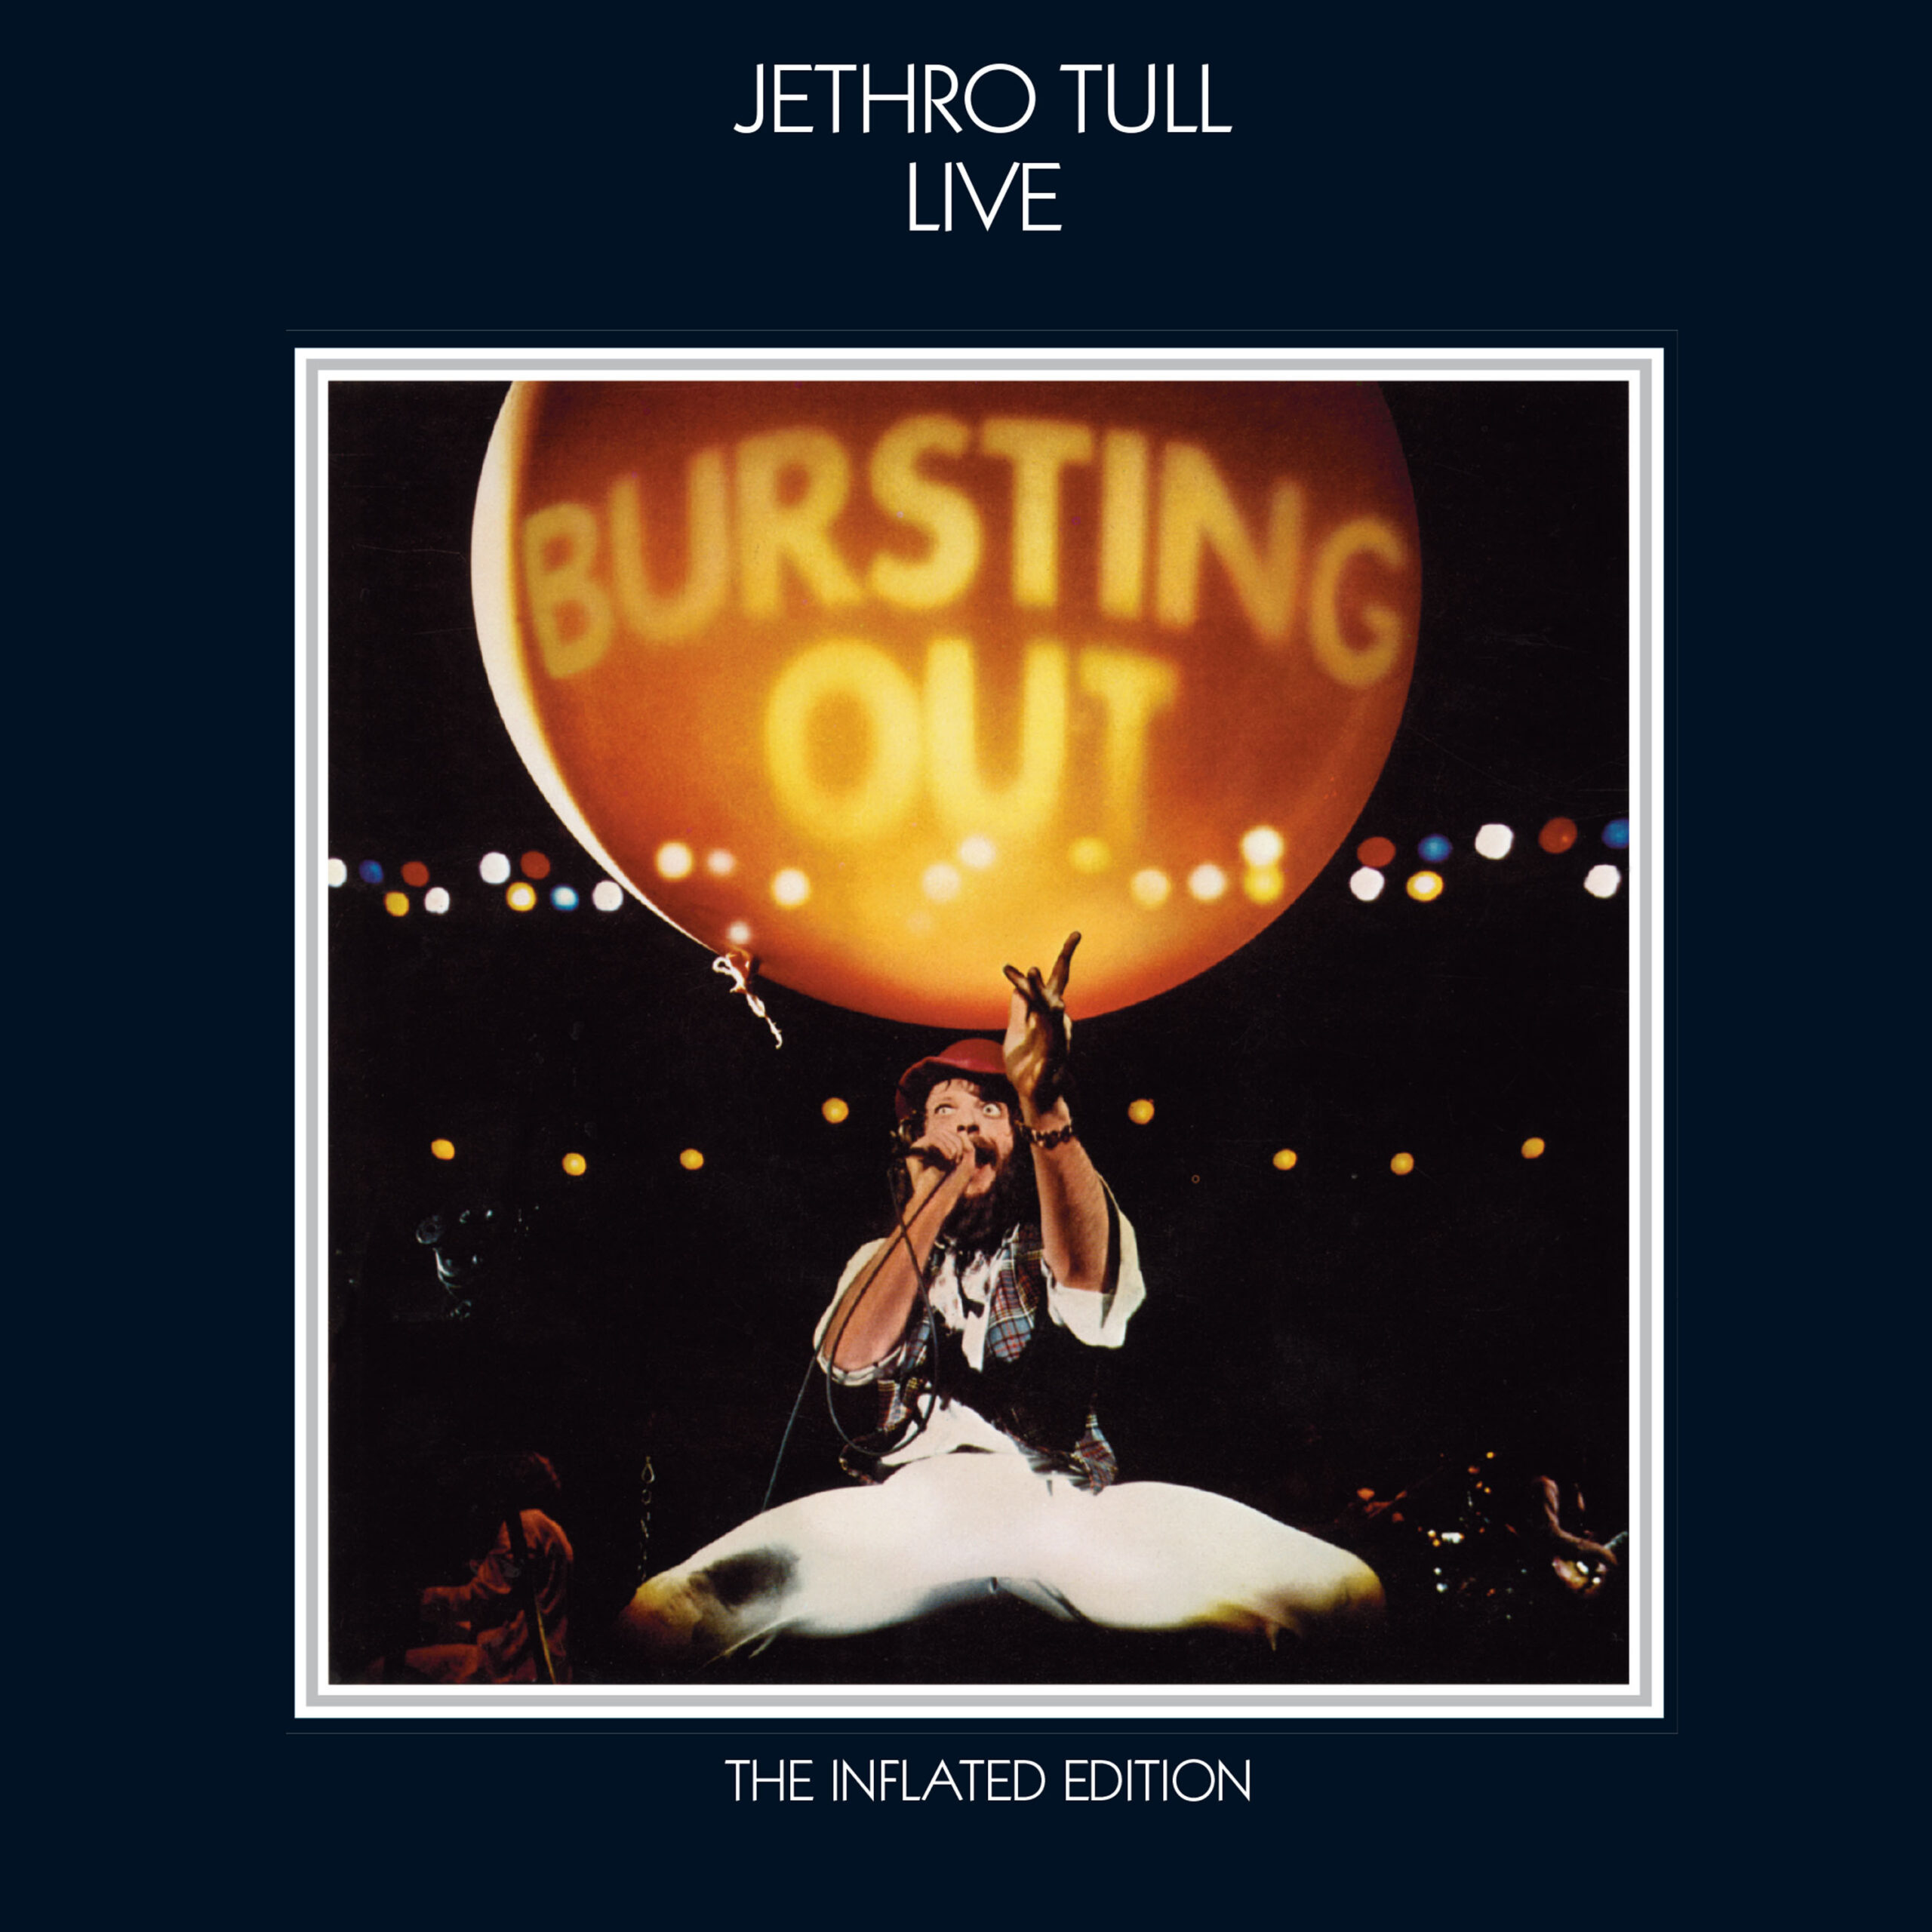 Jethro Tull / Bursting Out: Inflated Edition 3CD+3DVD